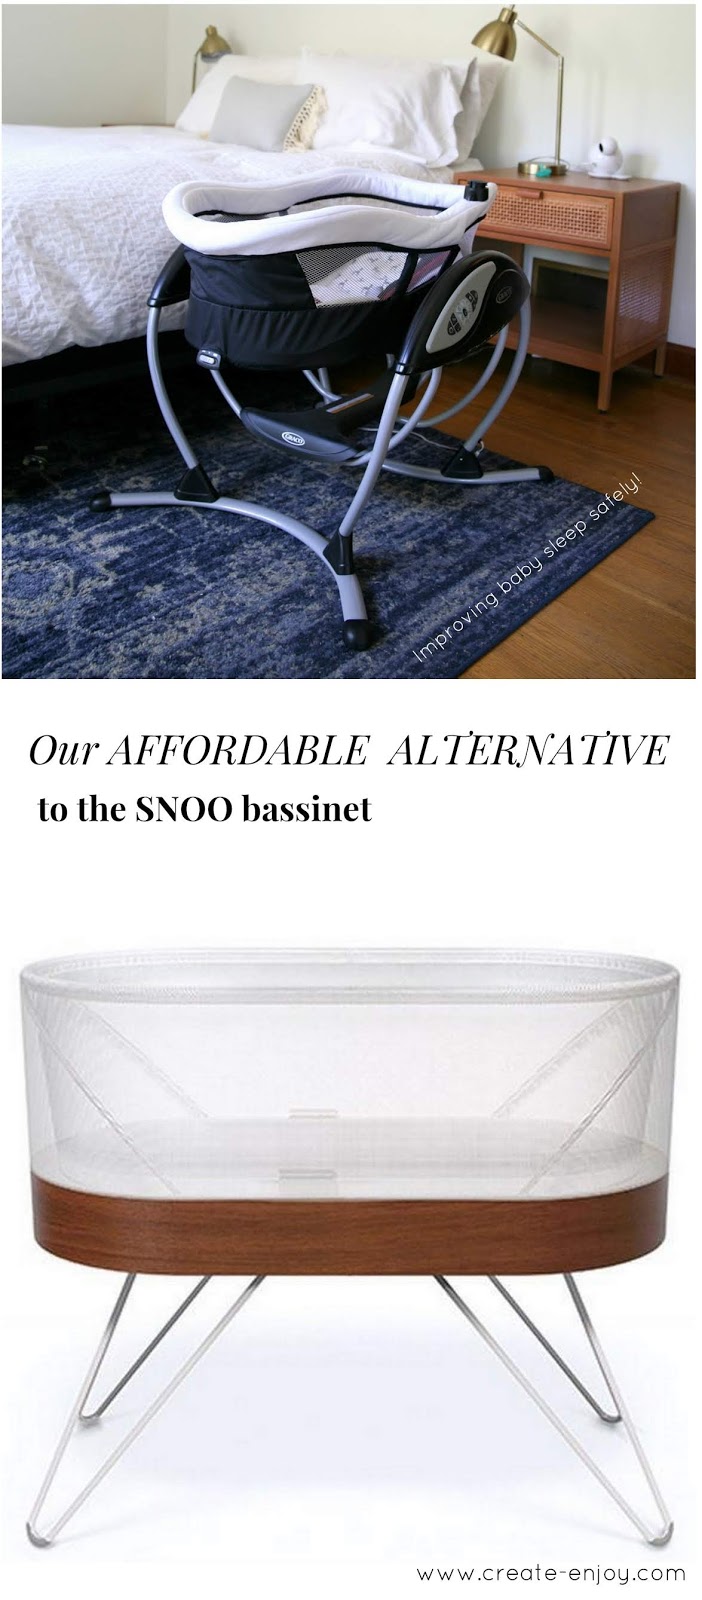 Our affordable alternative to the magical SNOO bassinet ...